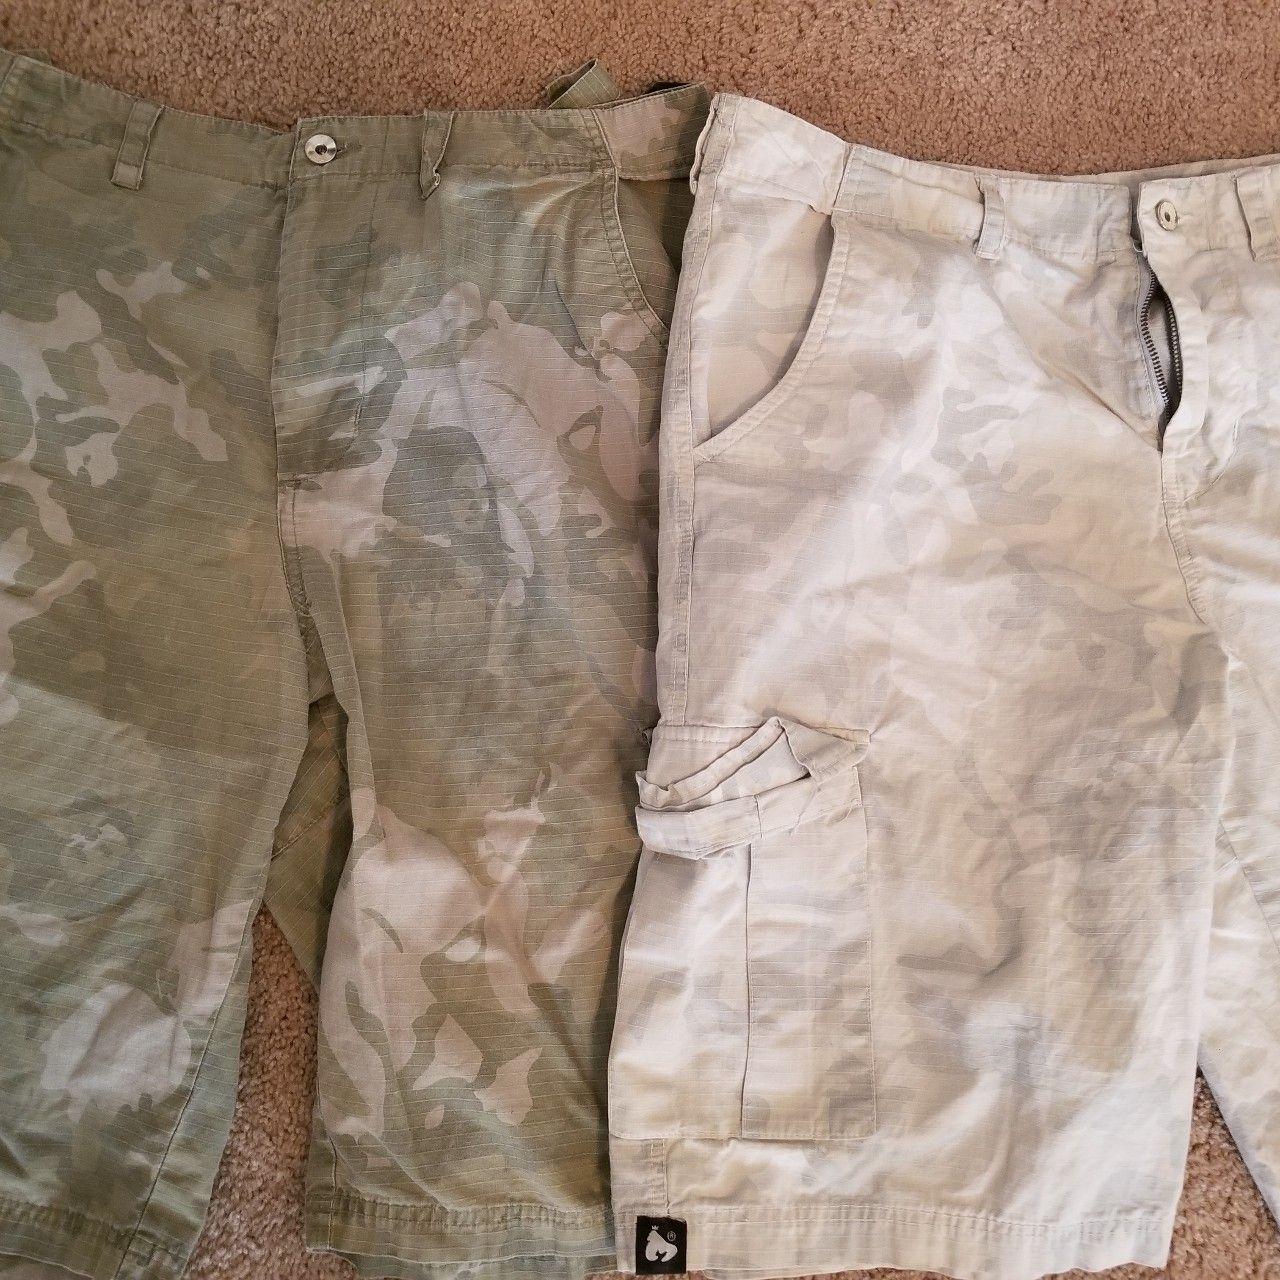 best of Shorts camo